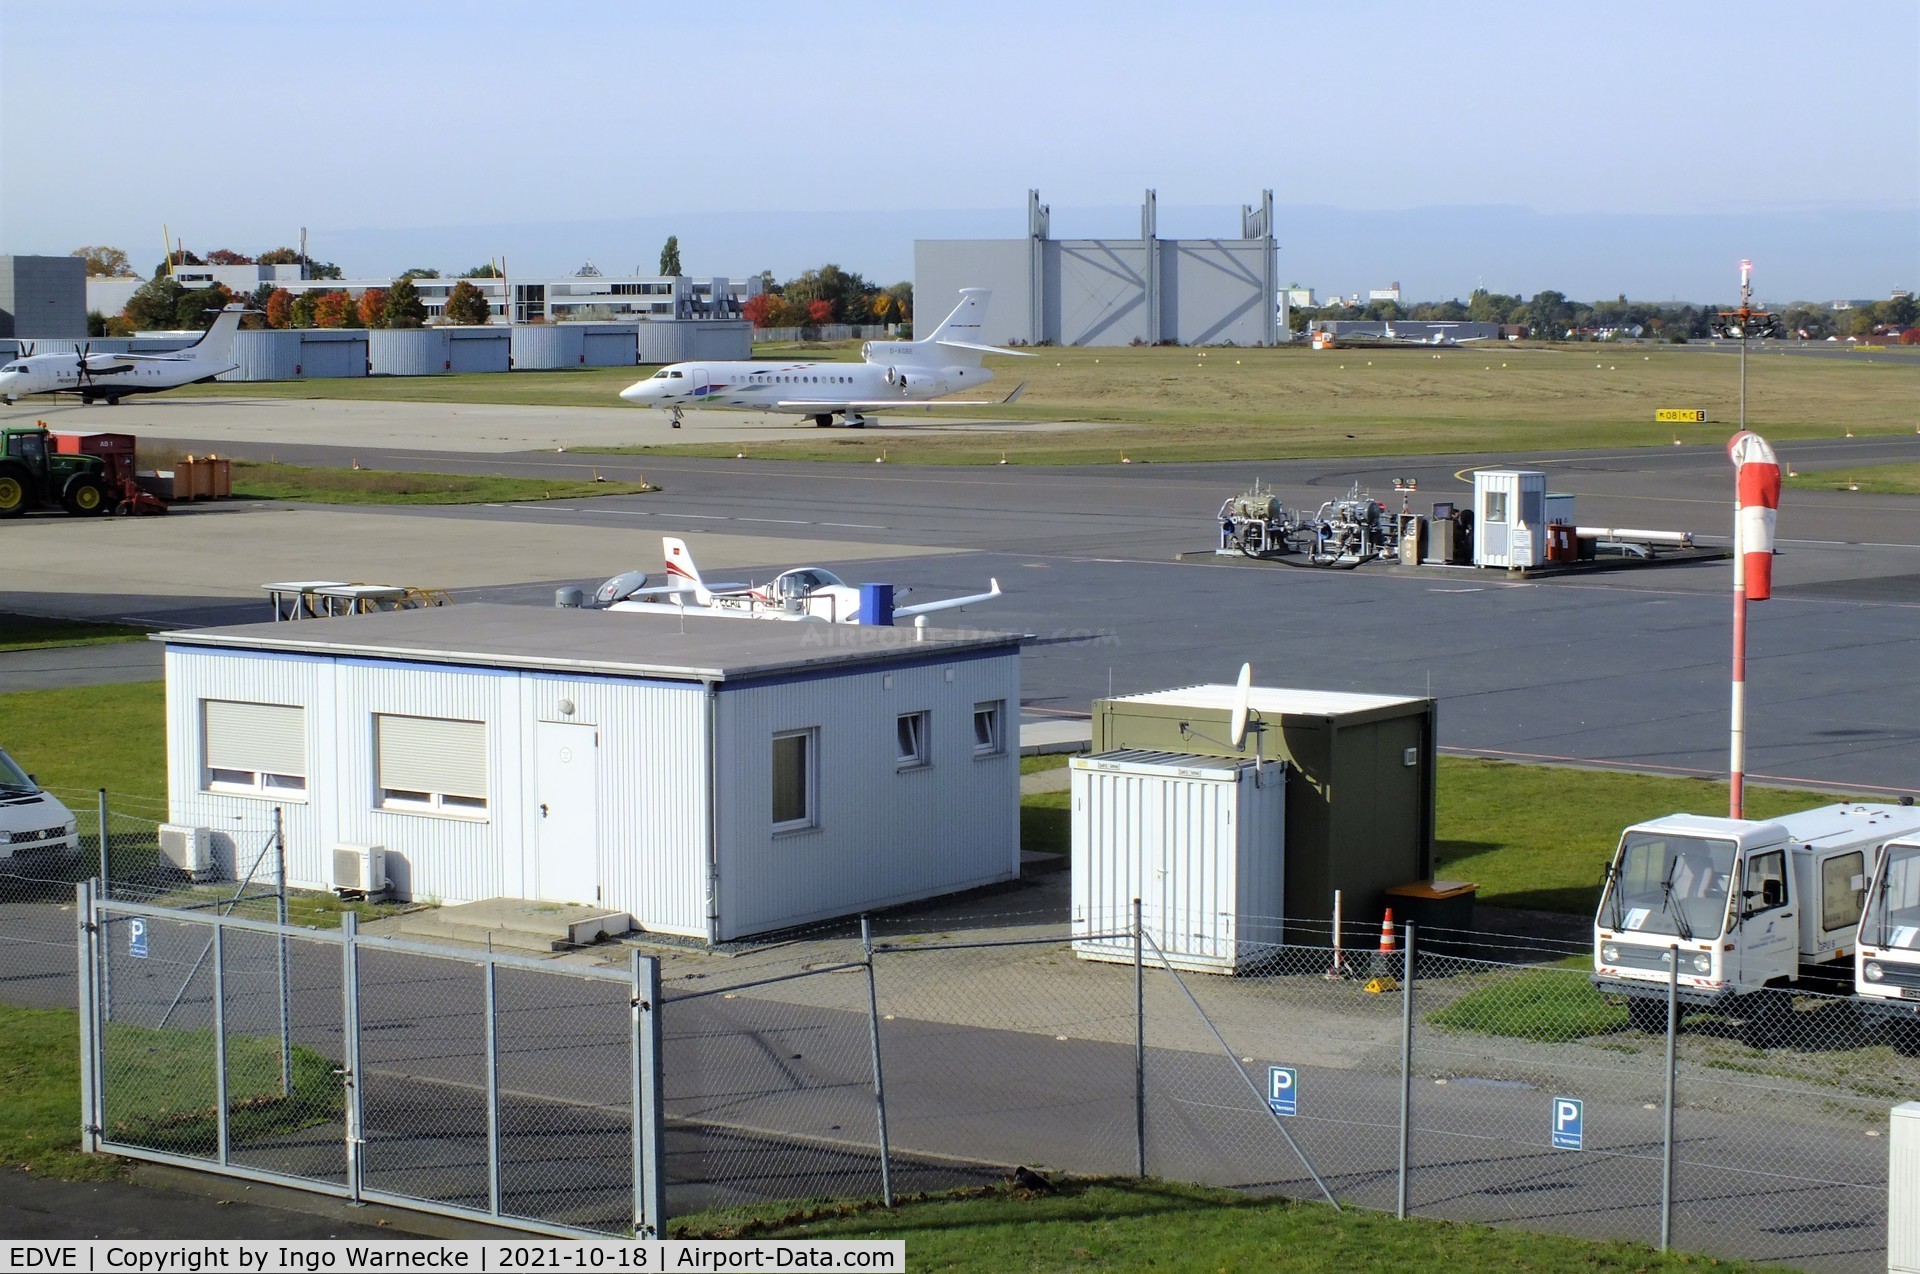 Braunschweig-Wolfsburg Regional Airport, Braunschweig, Lower Saxony Germany (EDVE) - looking west from the visitors gallery at the apron and airfield fuelling station at Braunschweig-Waggum airport